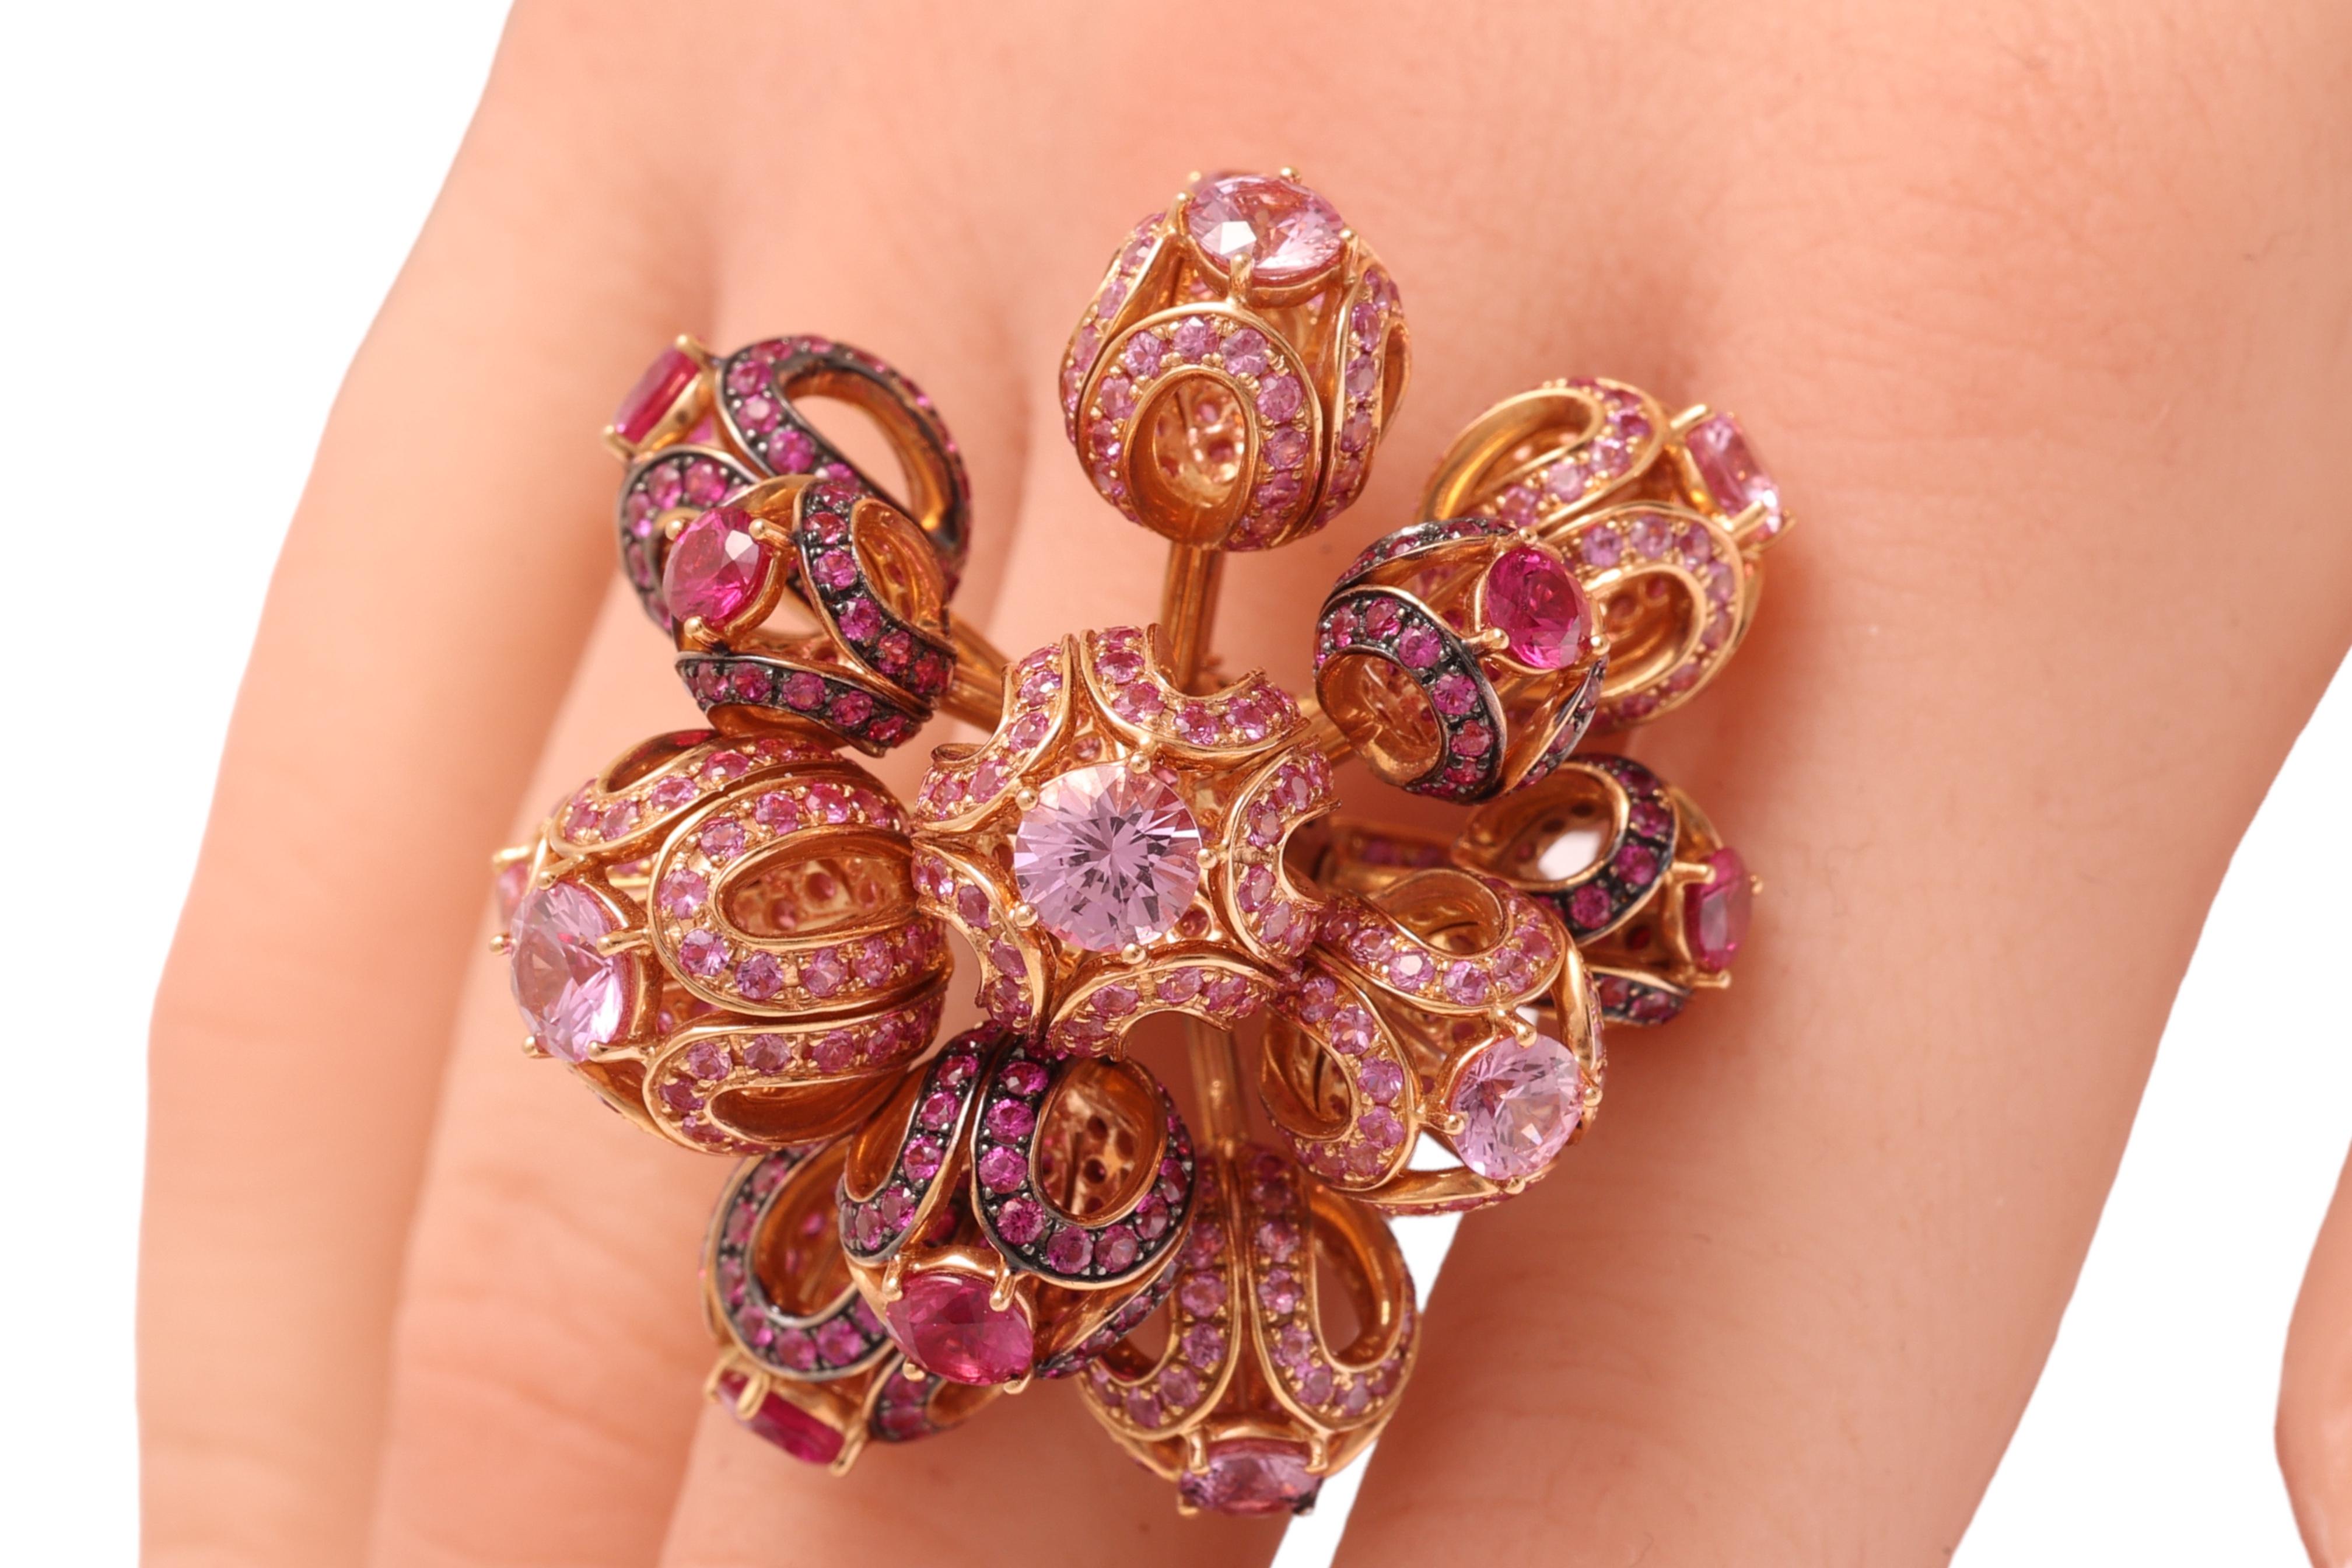 18kt Yellow Gold Moving Flower Ring with 15.65 ct Pink Sapphires For Sale 3